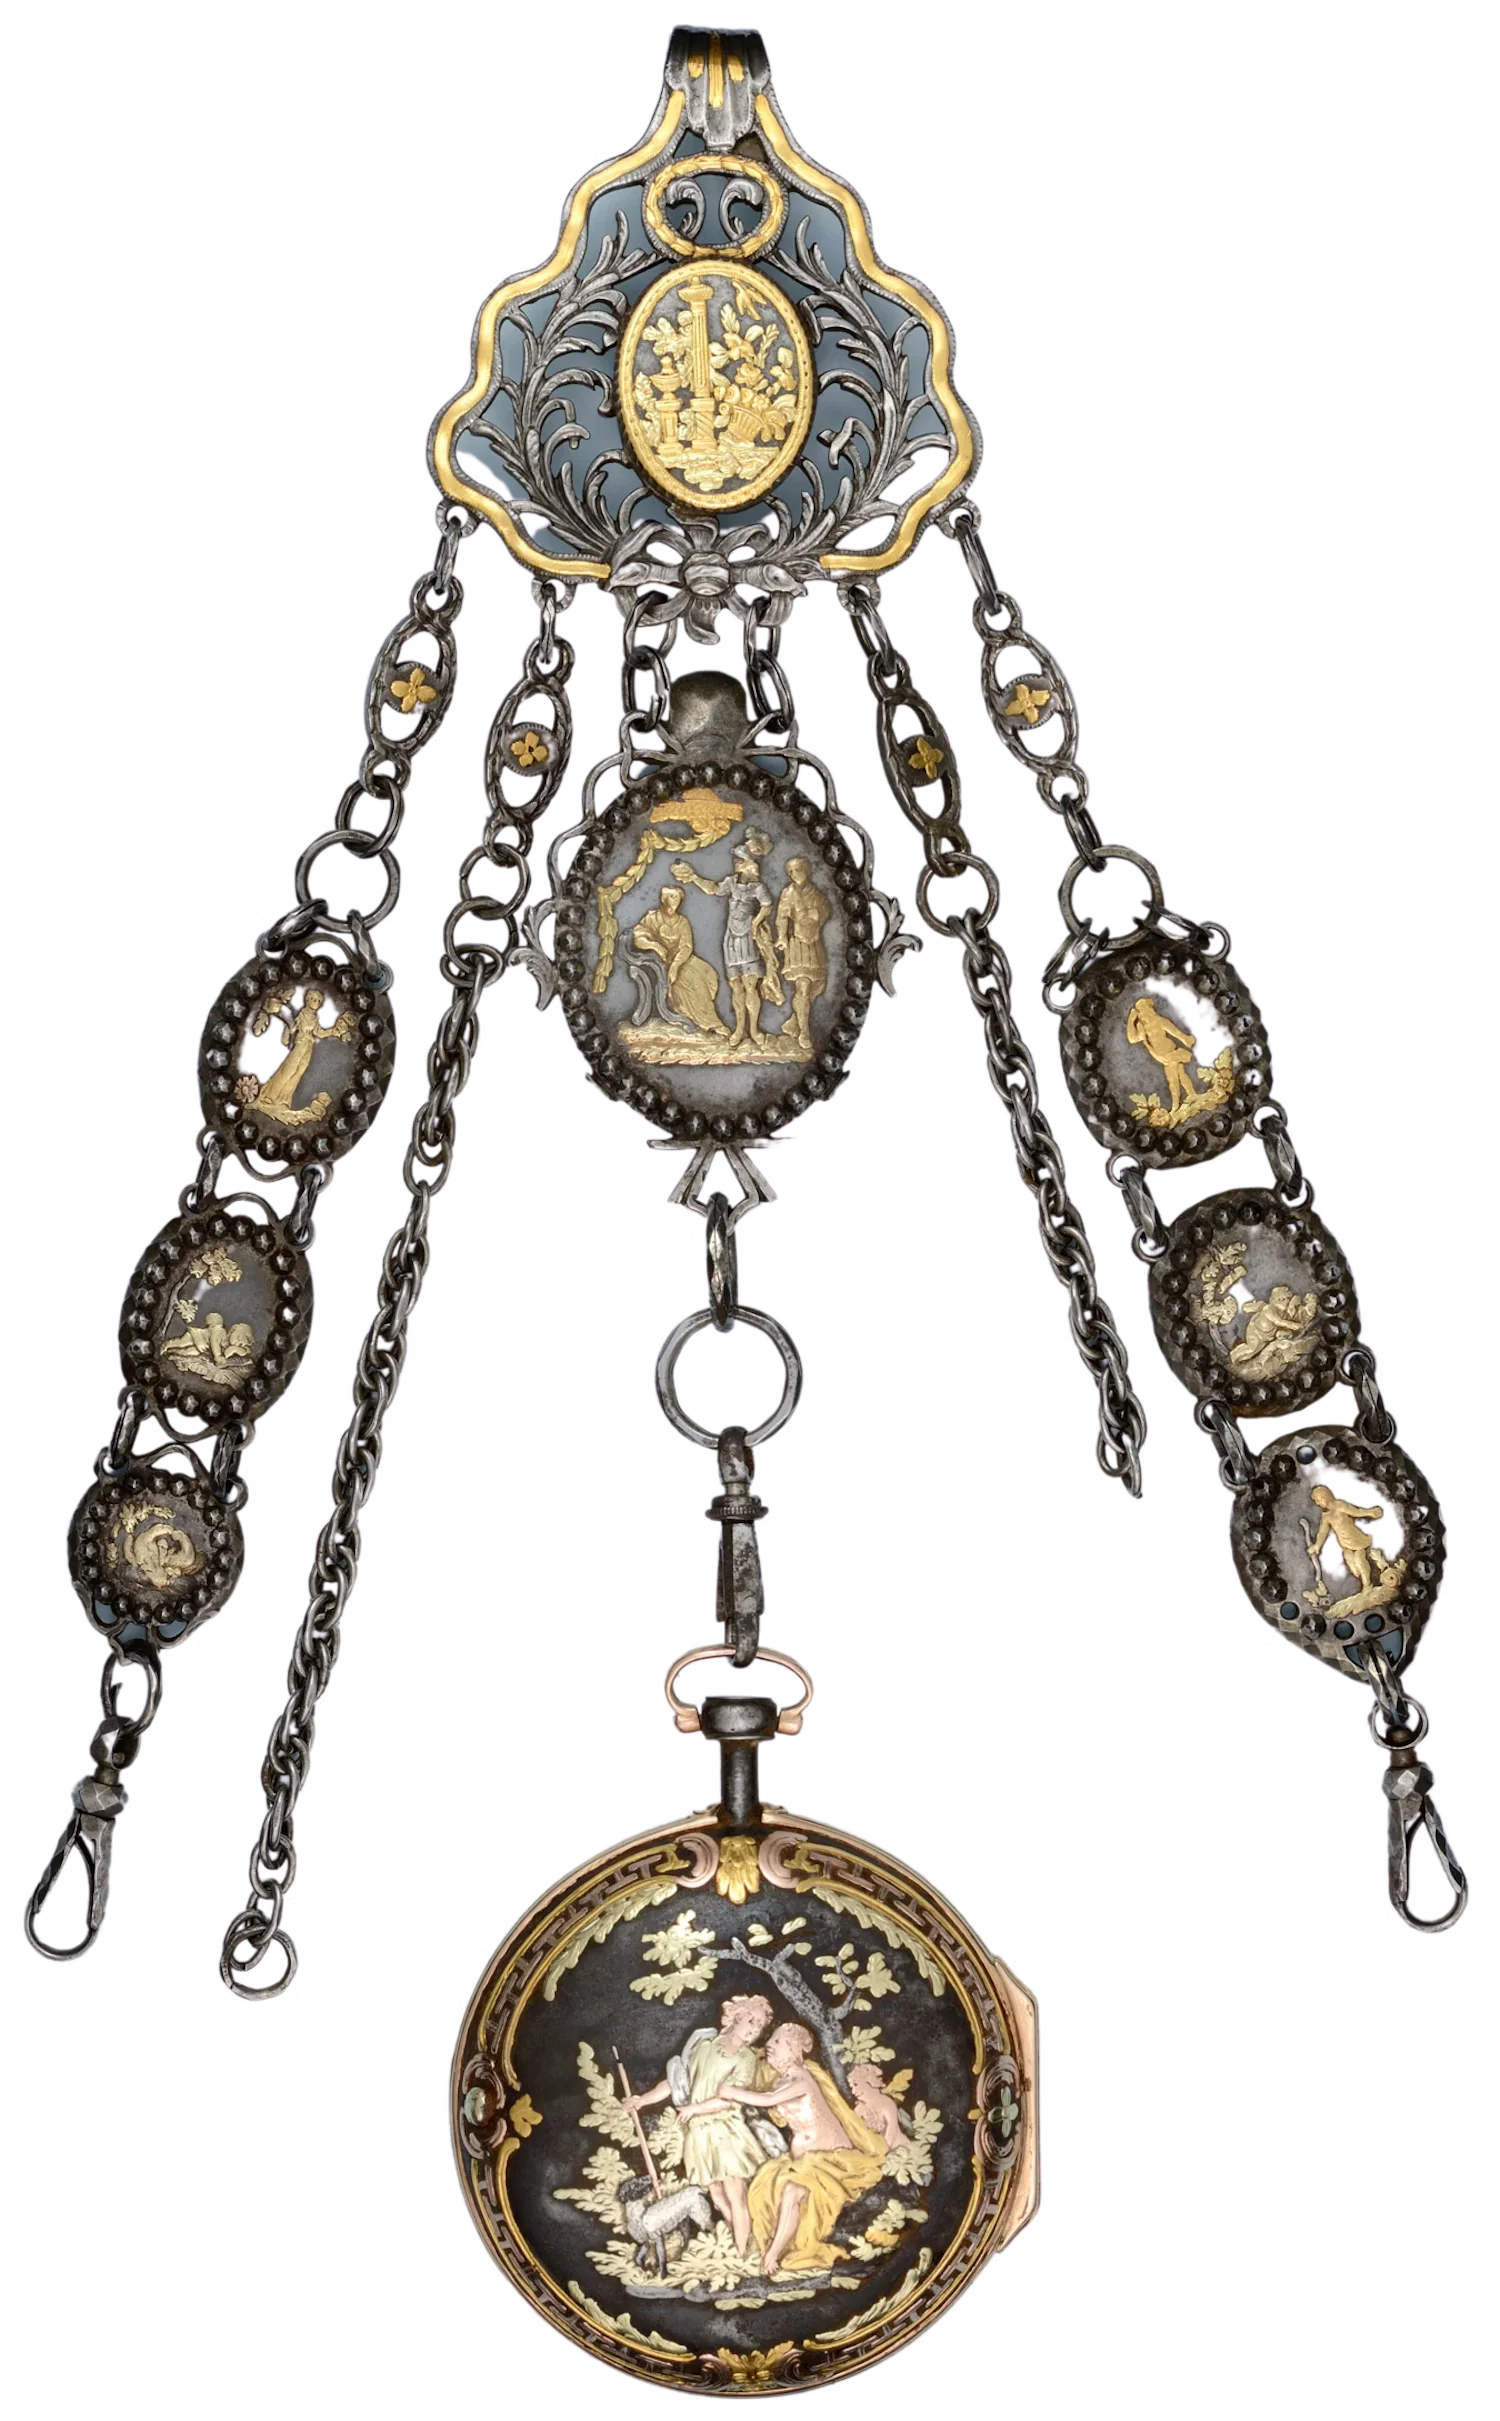 Sold at Auction: CHRONOMÉTRE RYTHMOS open pocket watch with chatelaine.